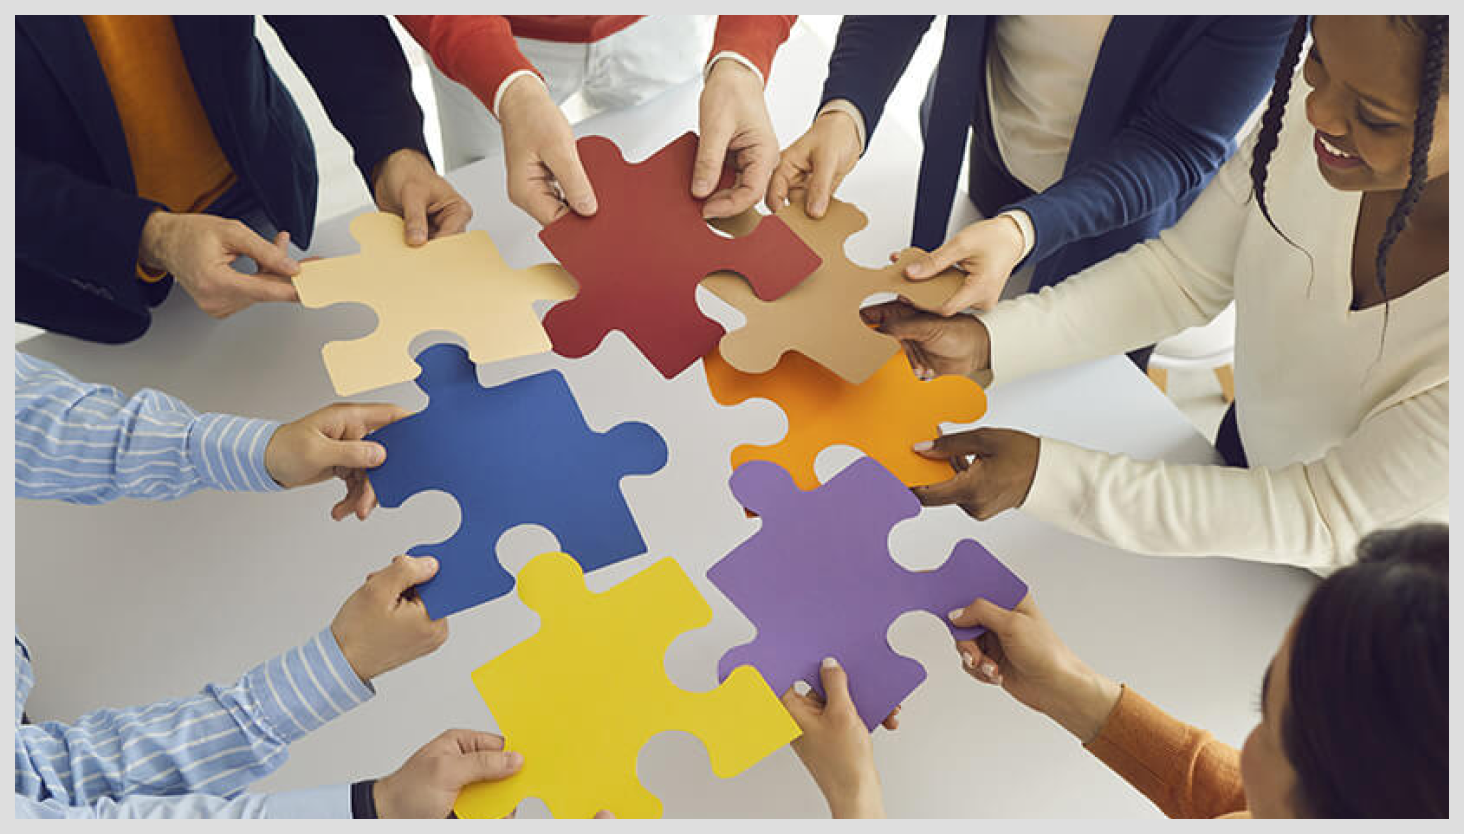 Group of people putting together large puzzle pieces